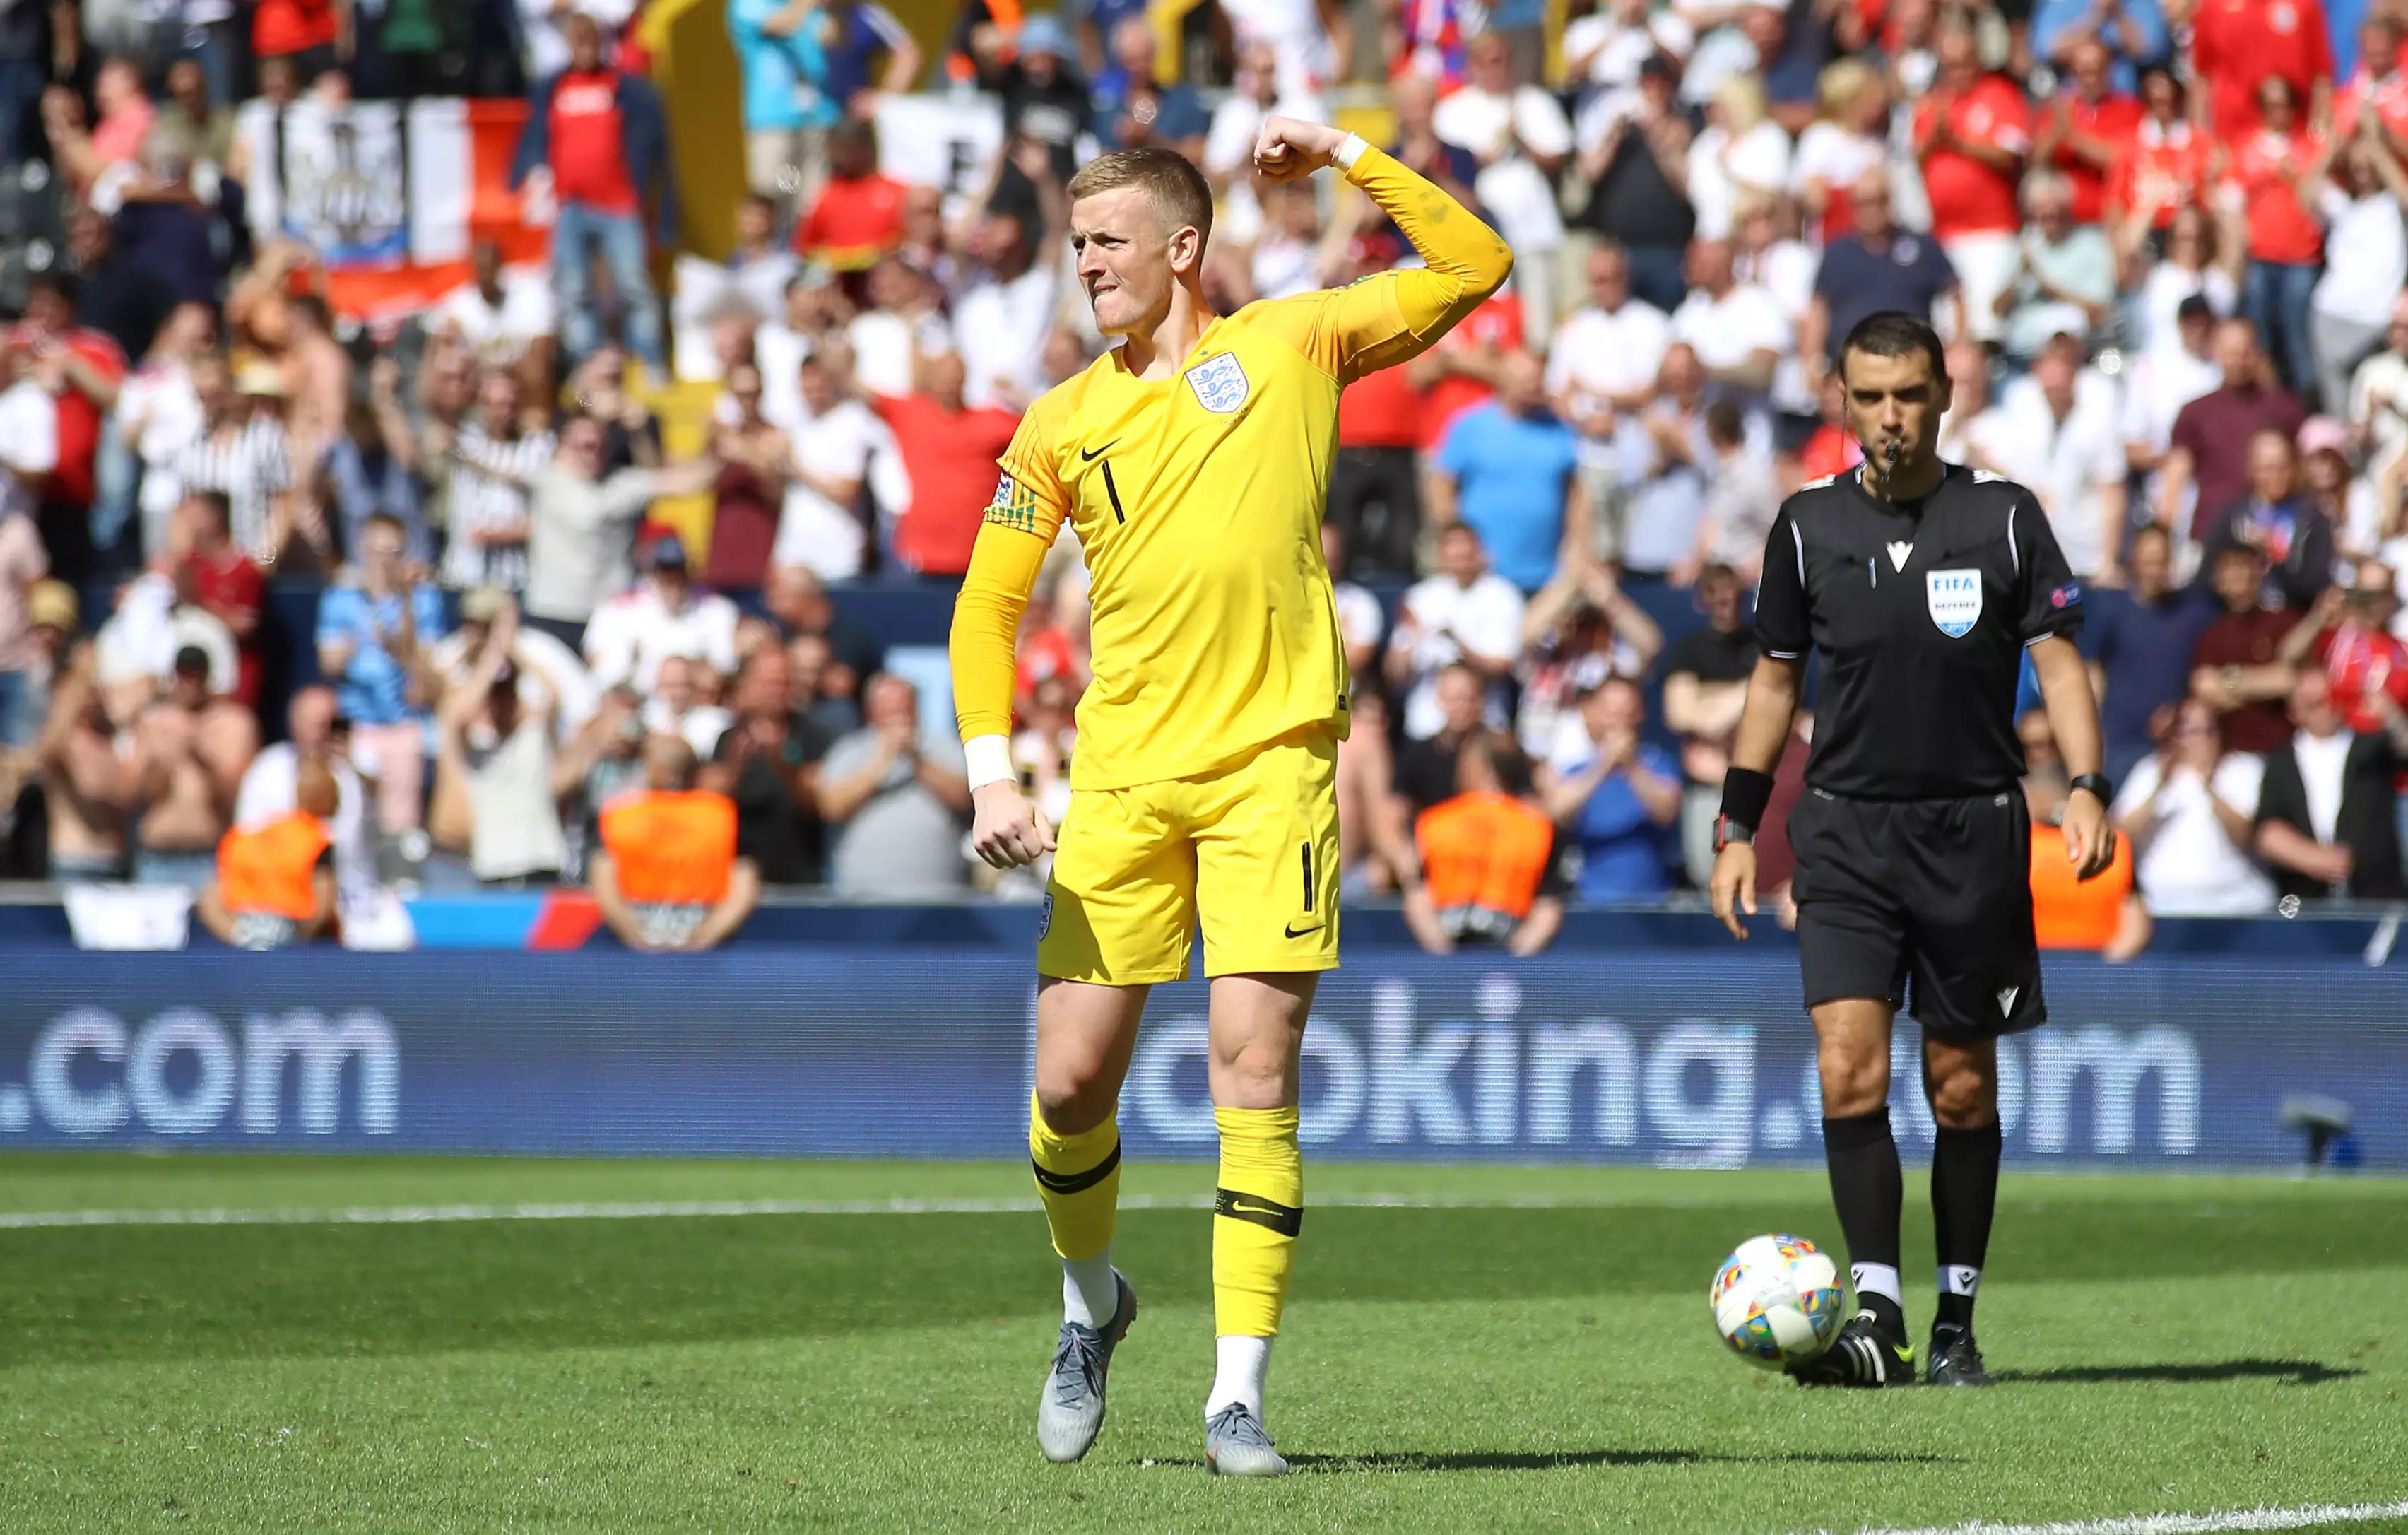 Pickford after scoring his penalty (Image